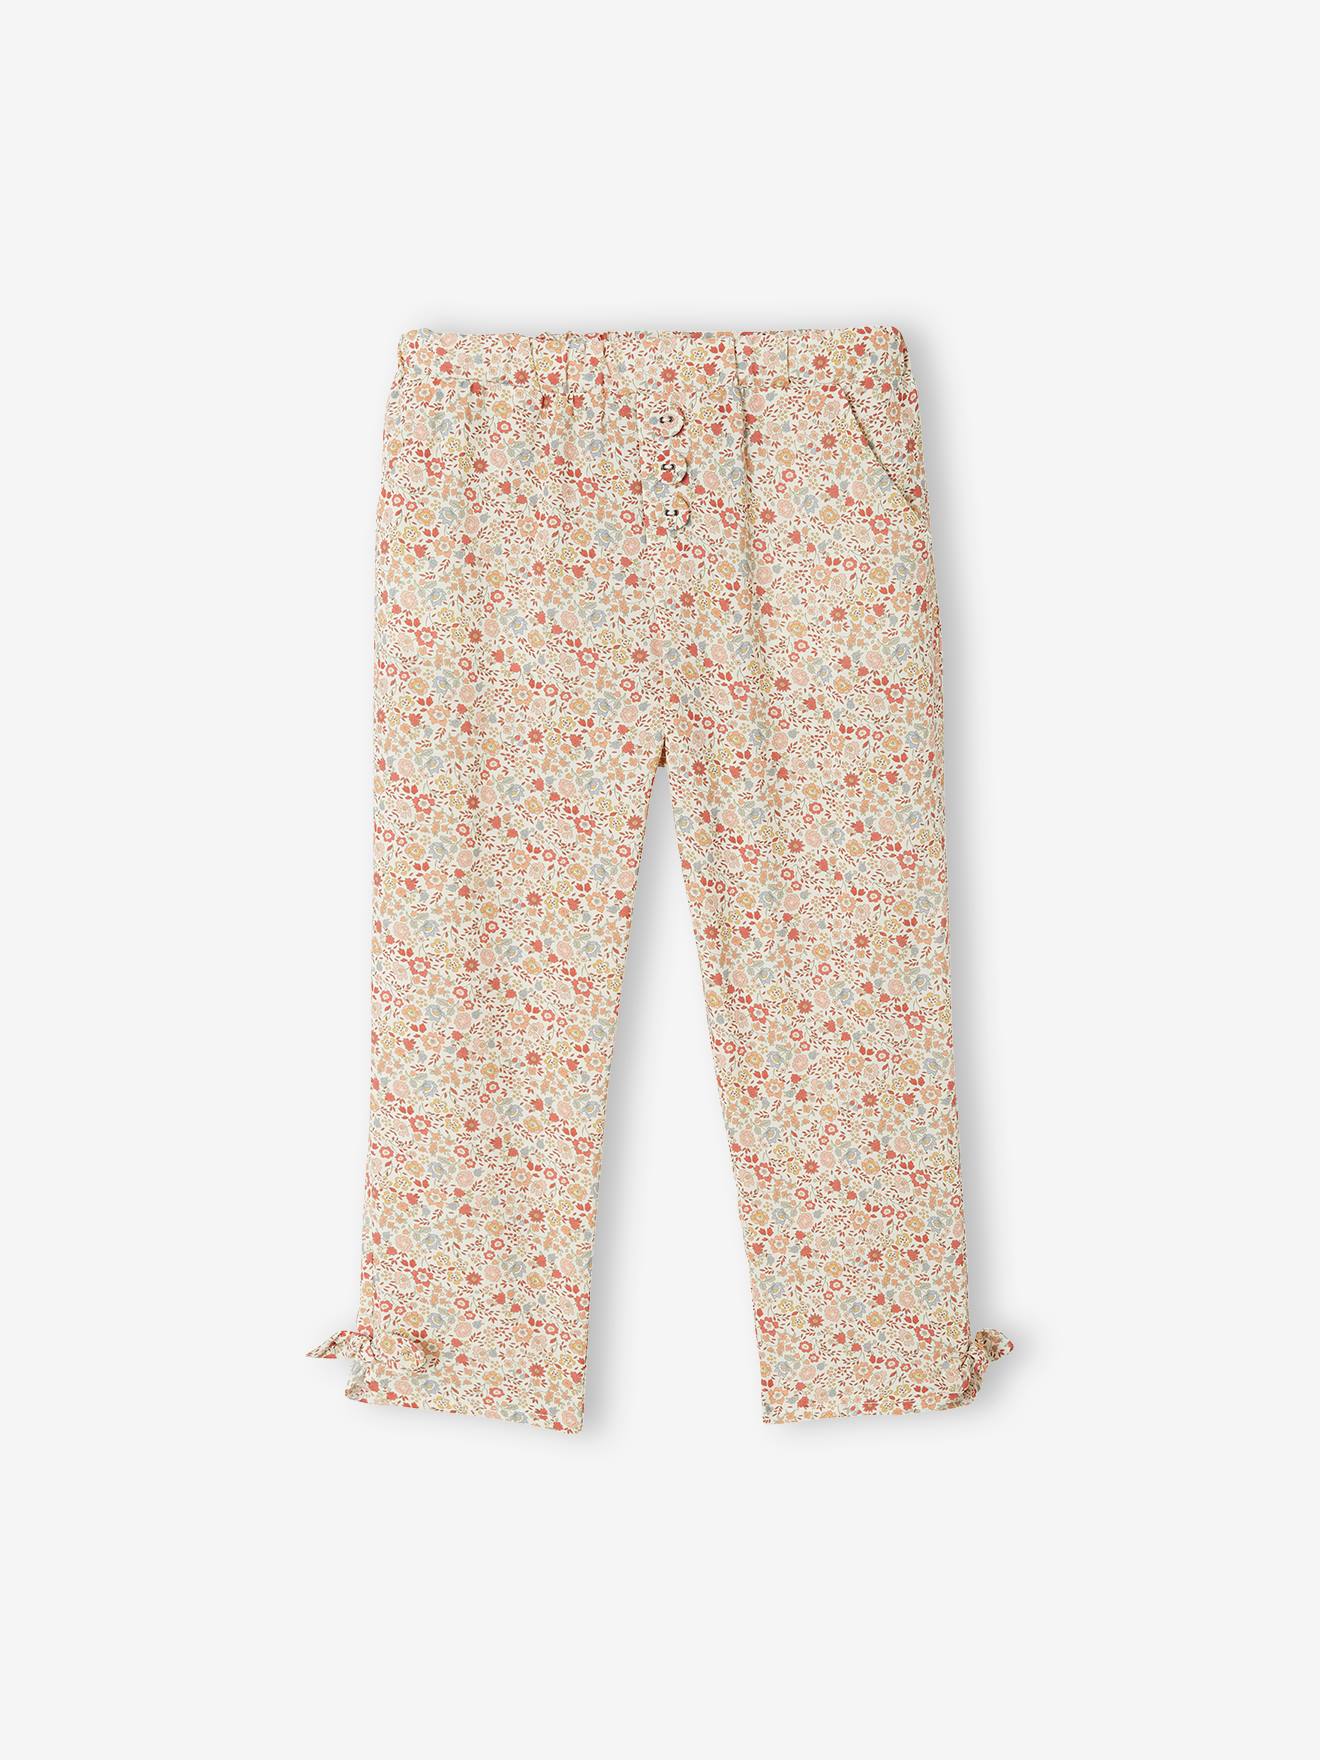 Cropped Fluid Trousers with Print, for Girls white dark all over printed